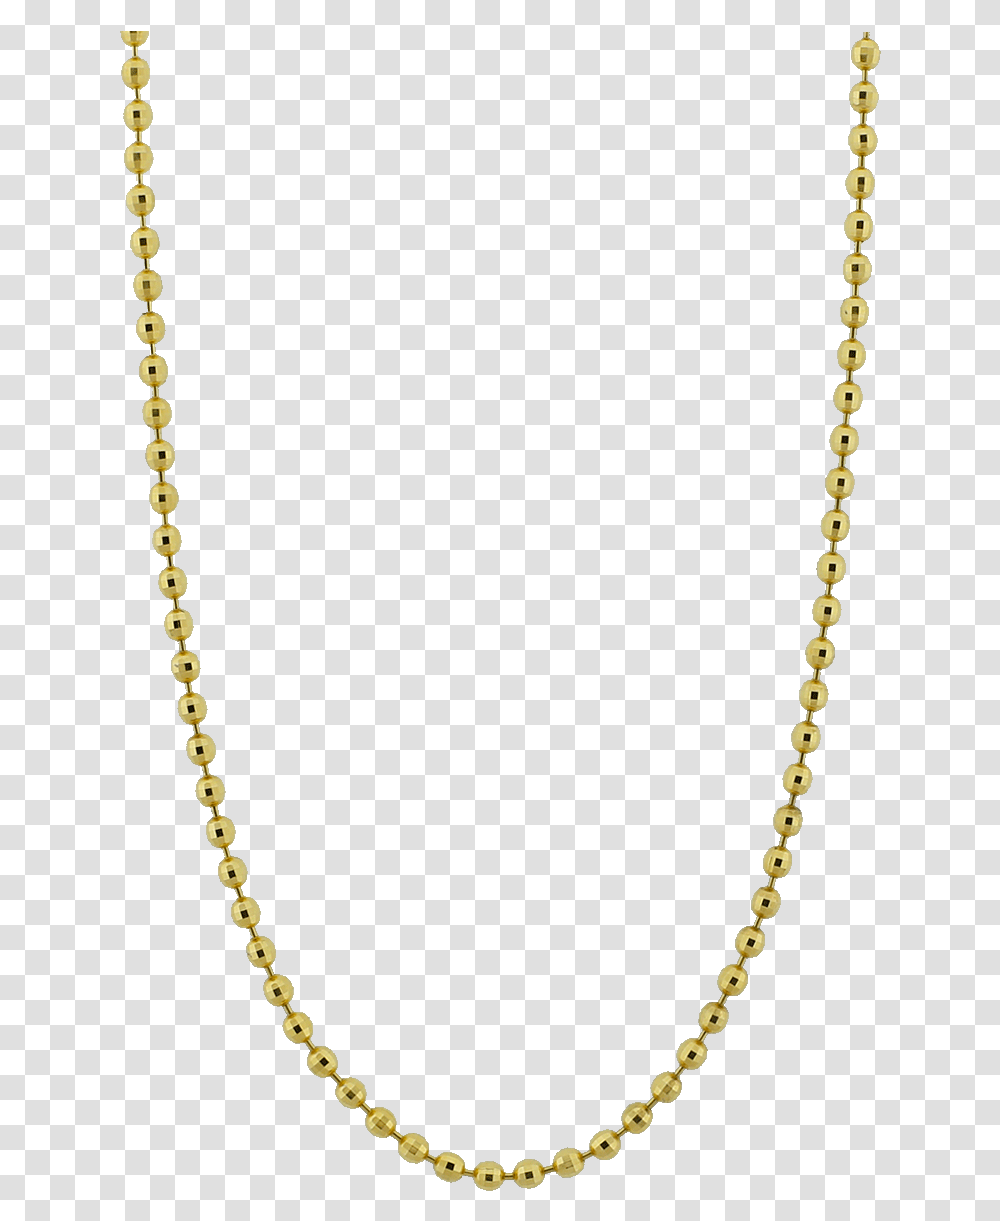 Tiffany Favrile Beetle Jewelry, Chain, Necklace, Accessories, Accessory Transparent Png